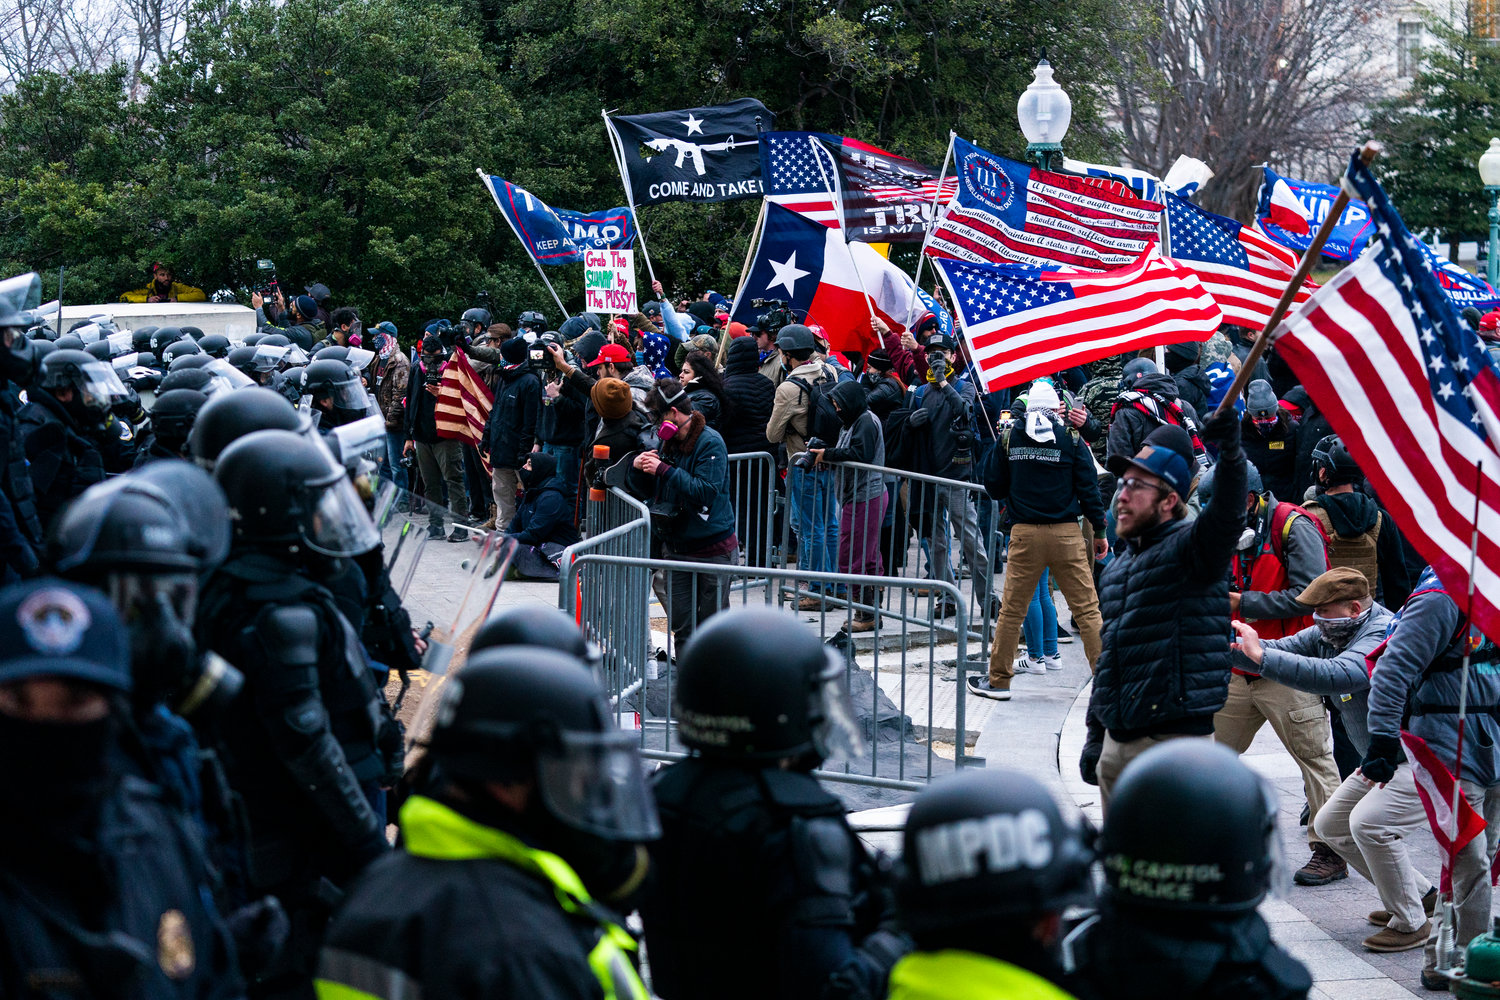 Insurrectionists loyal to President Donald Trump confronted U.S. Capitol Police officers outside the Capitol in Washington on Jan. 6, 2021.